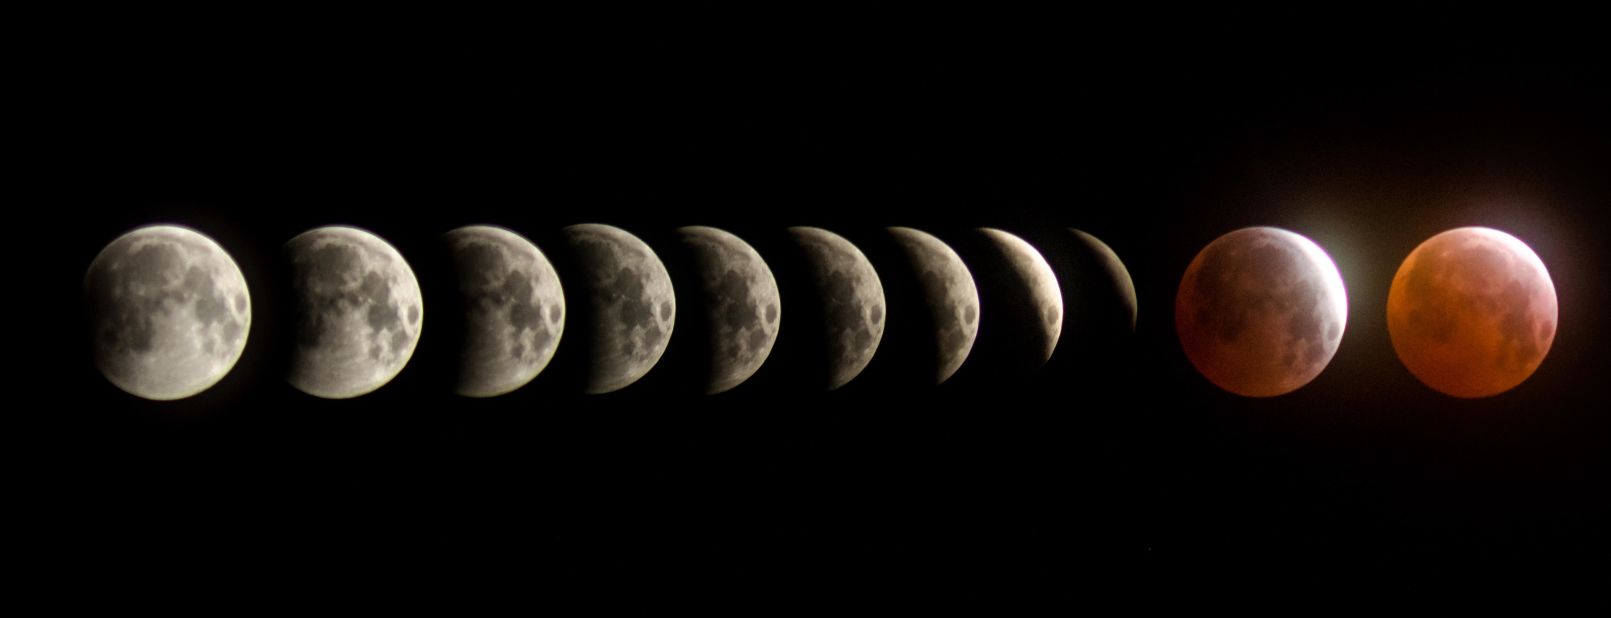 <a href="http://ireport.cnn.com/docs/DOC-1231089">BG Boyd </a>created a composition of the total lunar eclipse between the span of two hours Saturday morning in Tucson, Arizona. There are 10 minutes between each frame, he explained